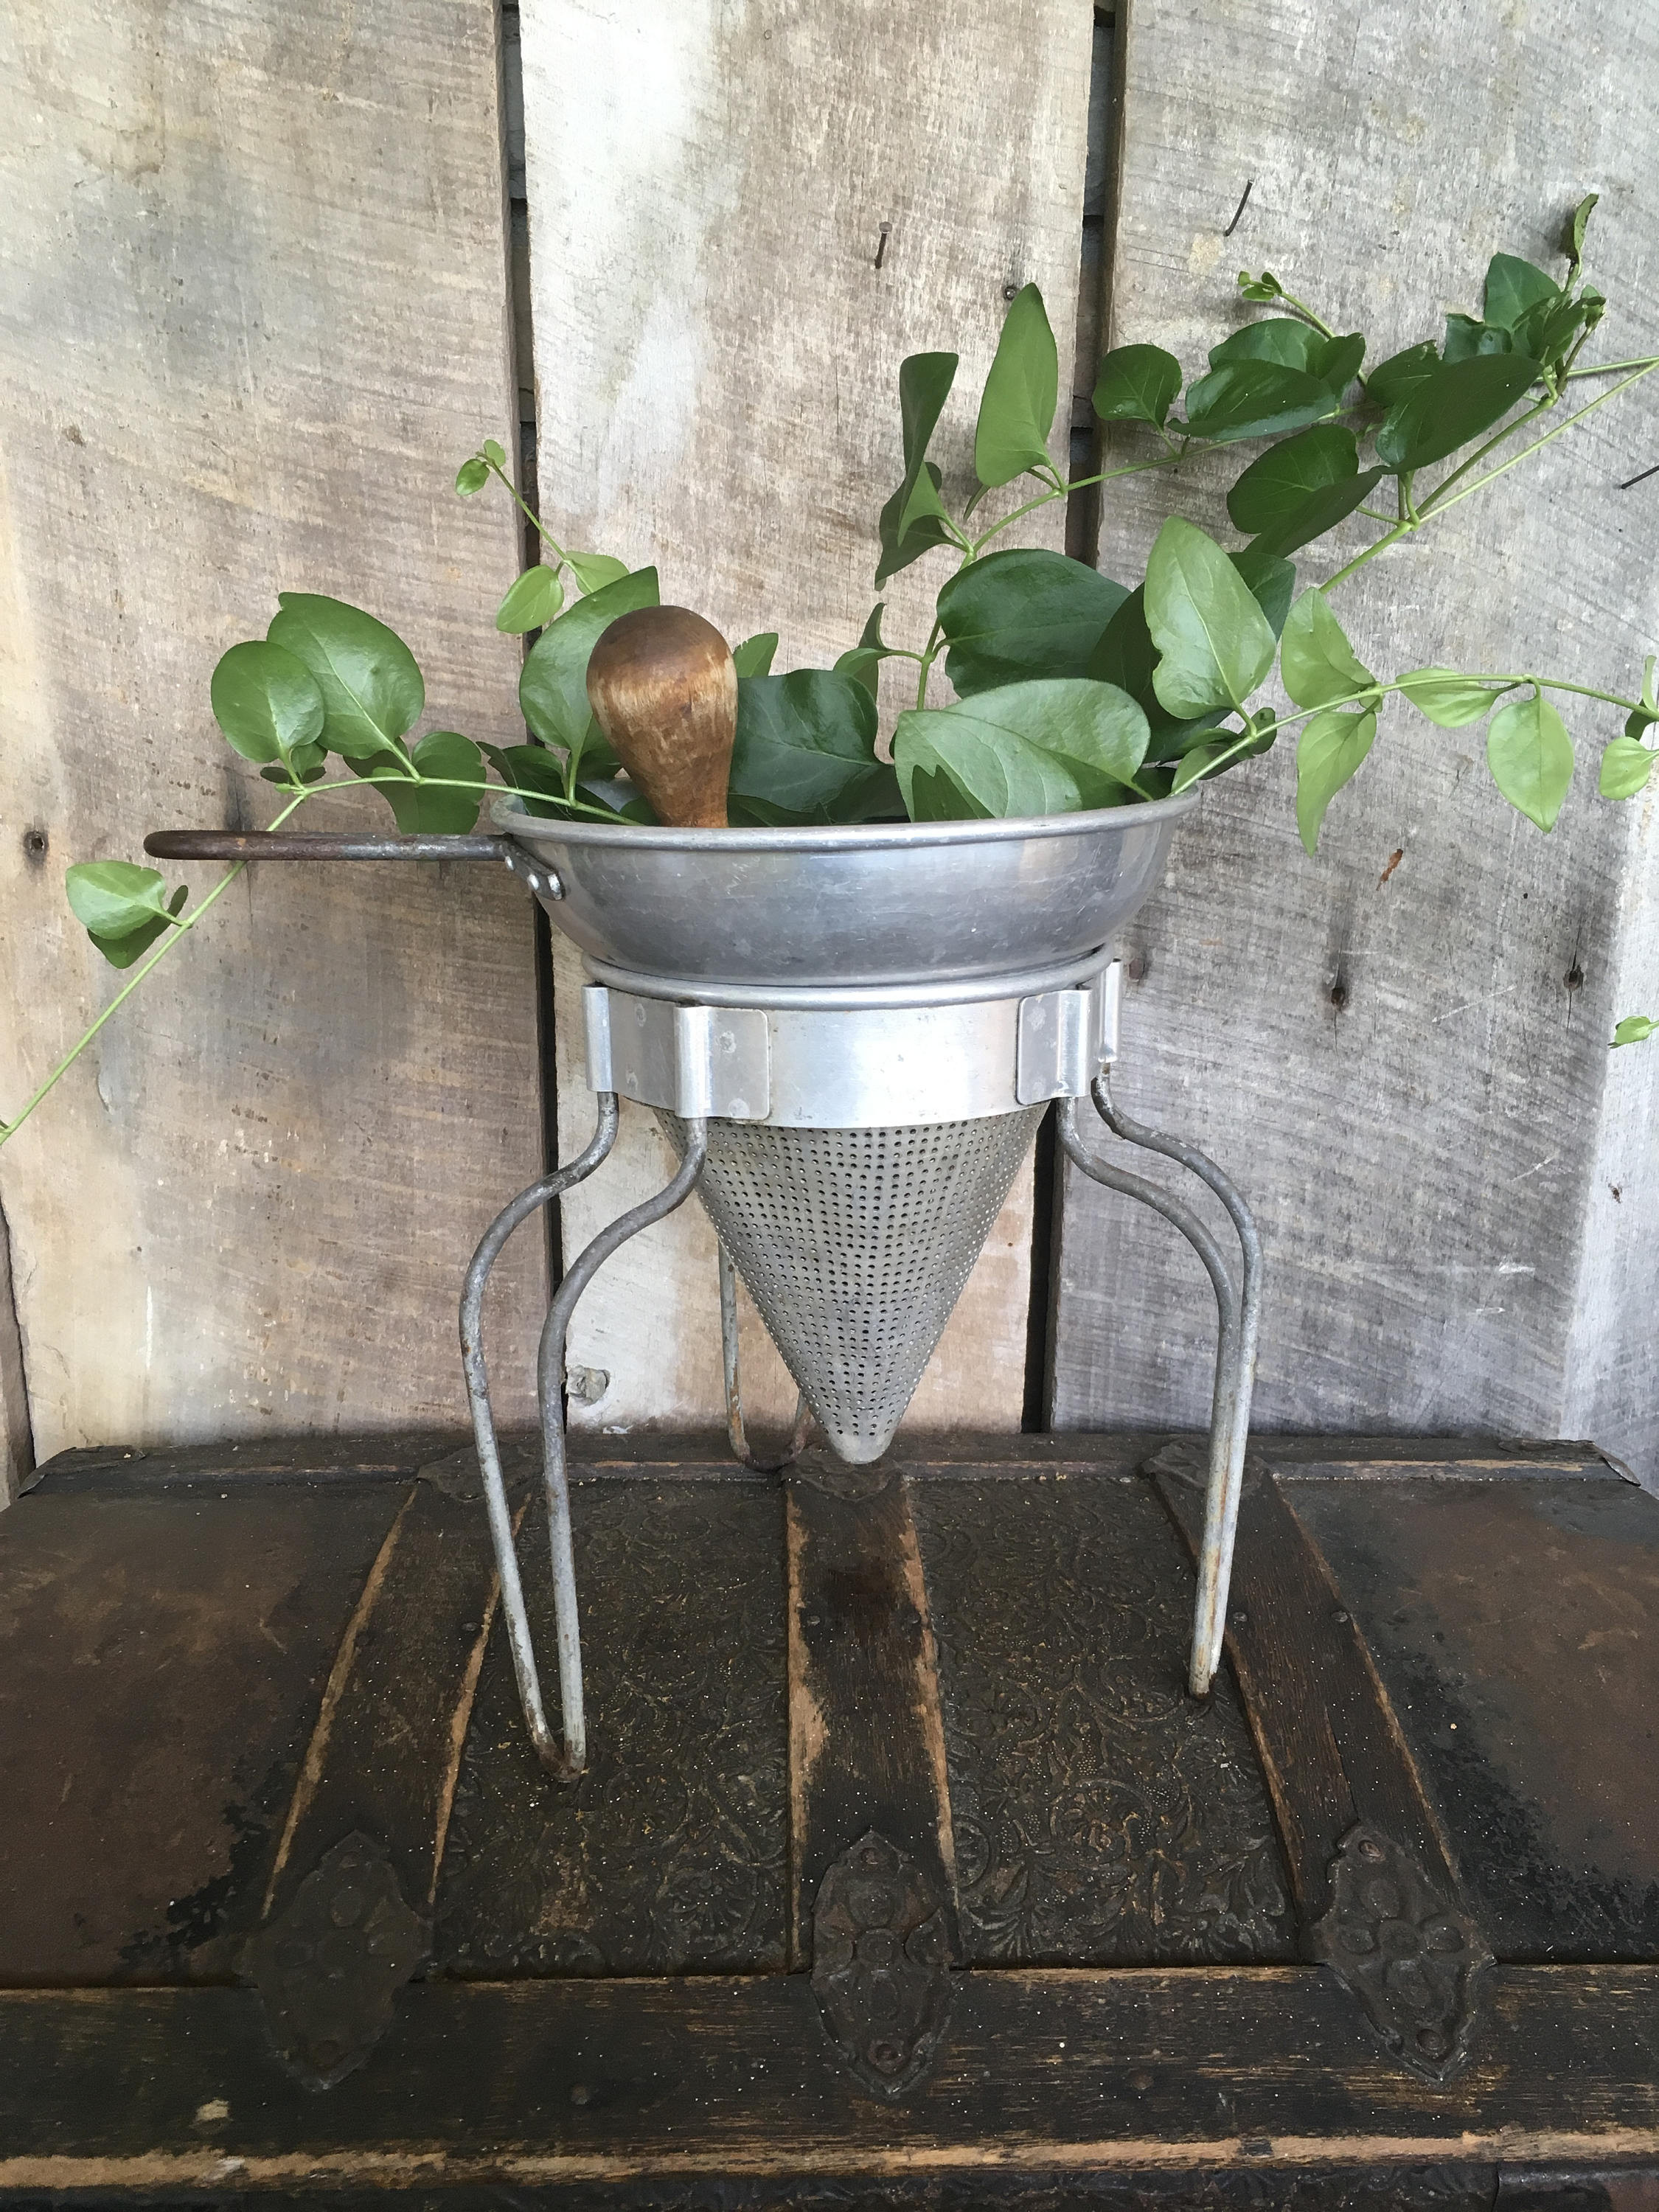 15 Famous Galvanized French Flower Vase 2022 free download galvanized french flower vase of vintage wear ever strainer aluminum juicer canning wood mallet etsy with dc29fc294c28ezoom